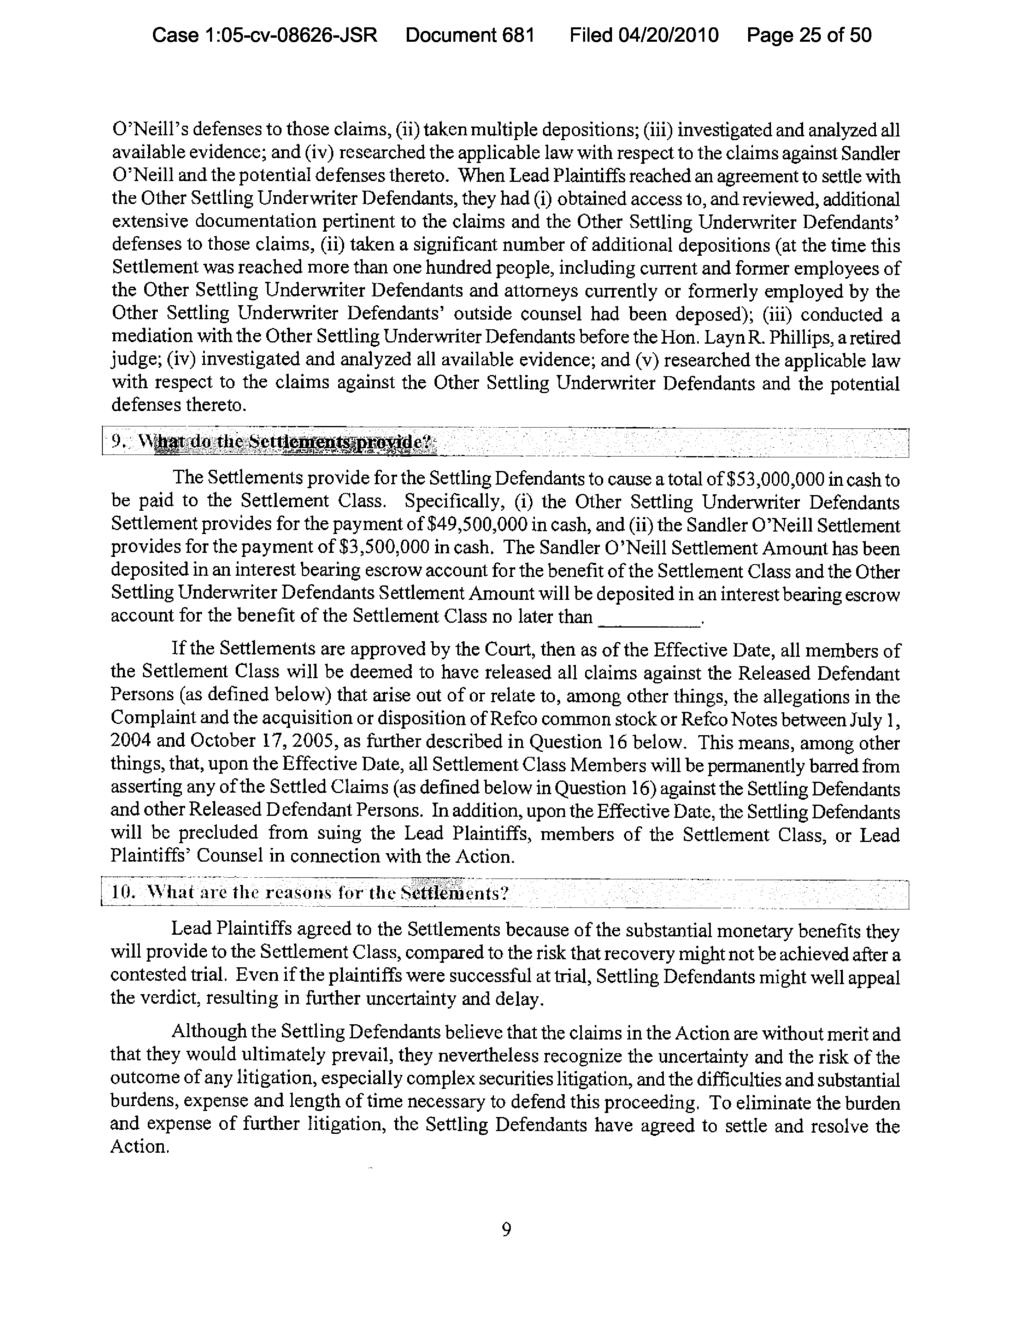 Case 1:05-cv-08626-JSR Document 681 Filed 04/20/2010 Page 25 of 50 O'Neill's defenses to those claims, (ii) taken multiple depositions; (iii) investigated and analyzed all available evidence; and